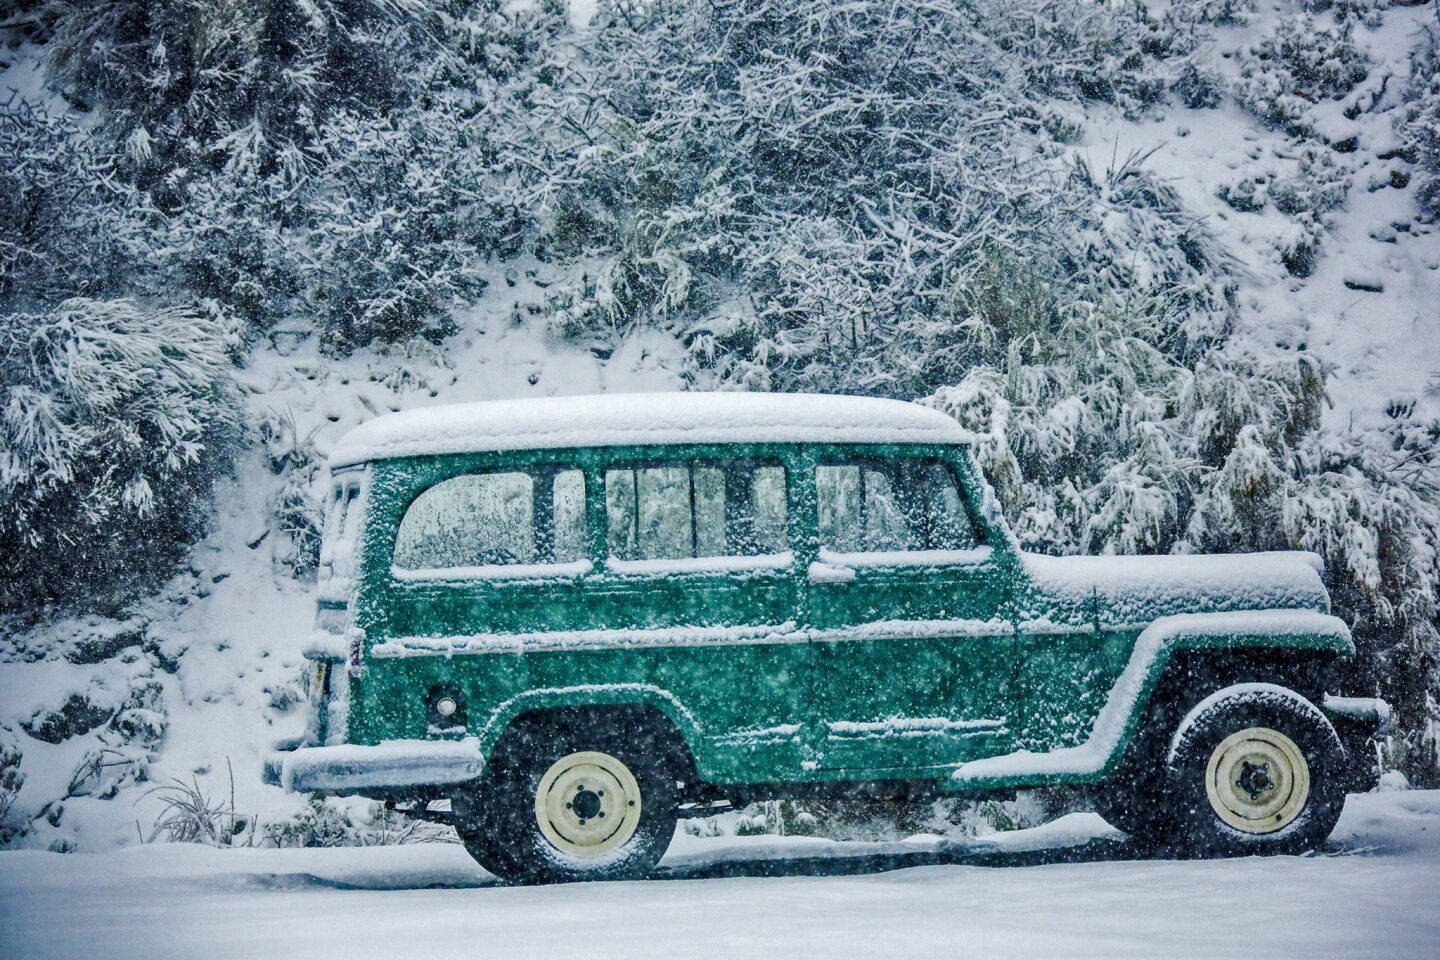 Heavy snow fall blankets an old truck in Wrightwood.